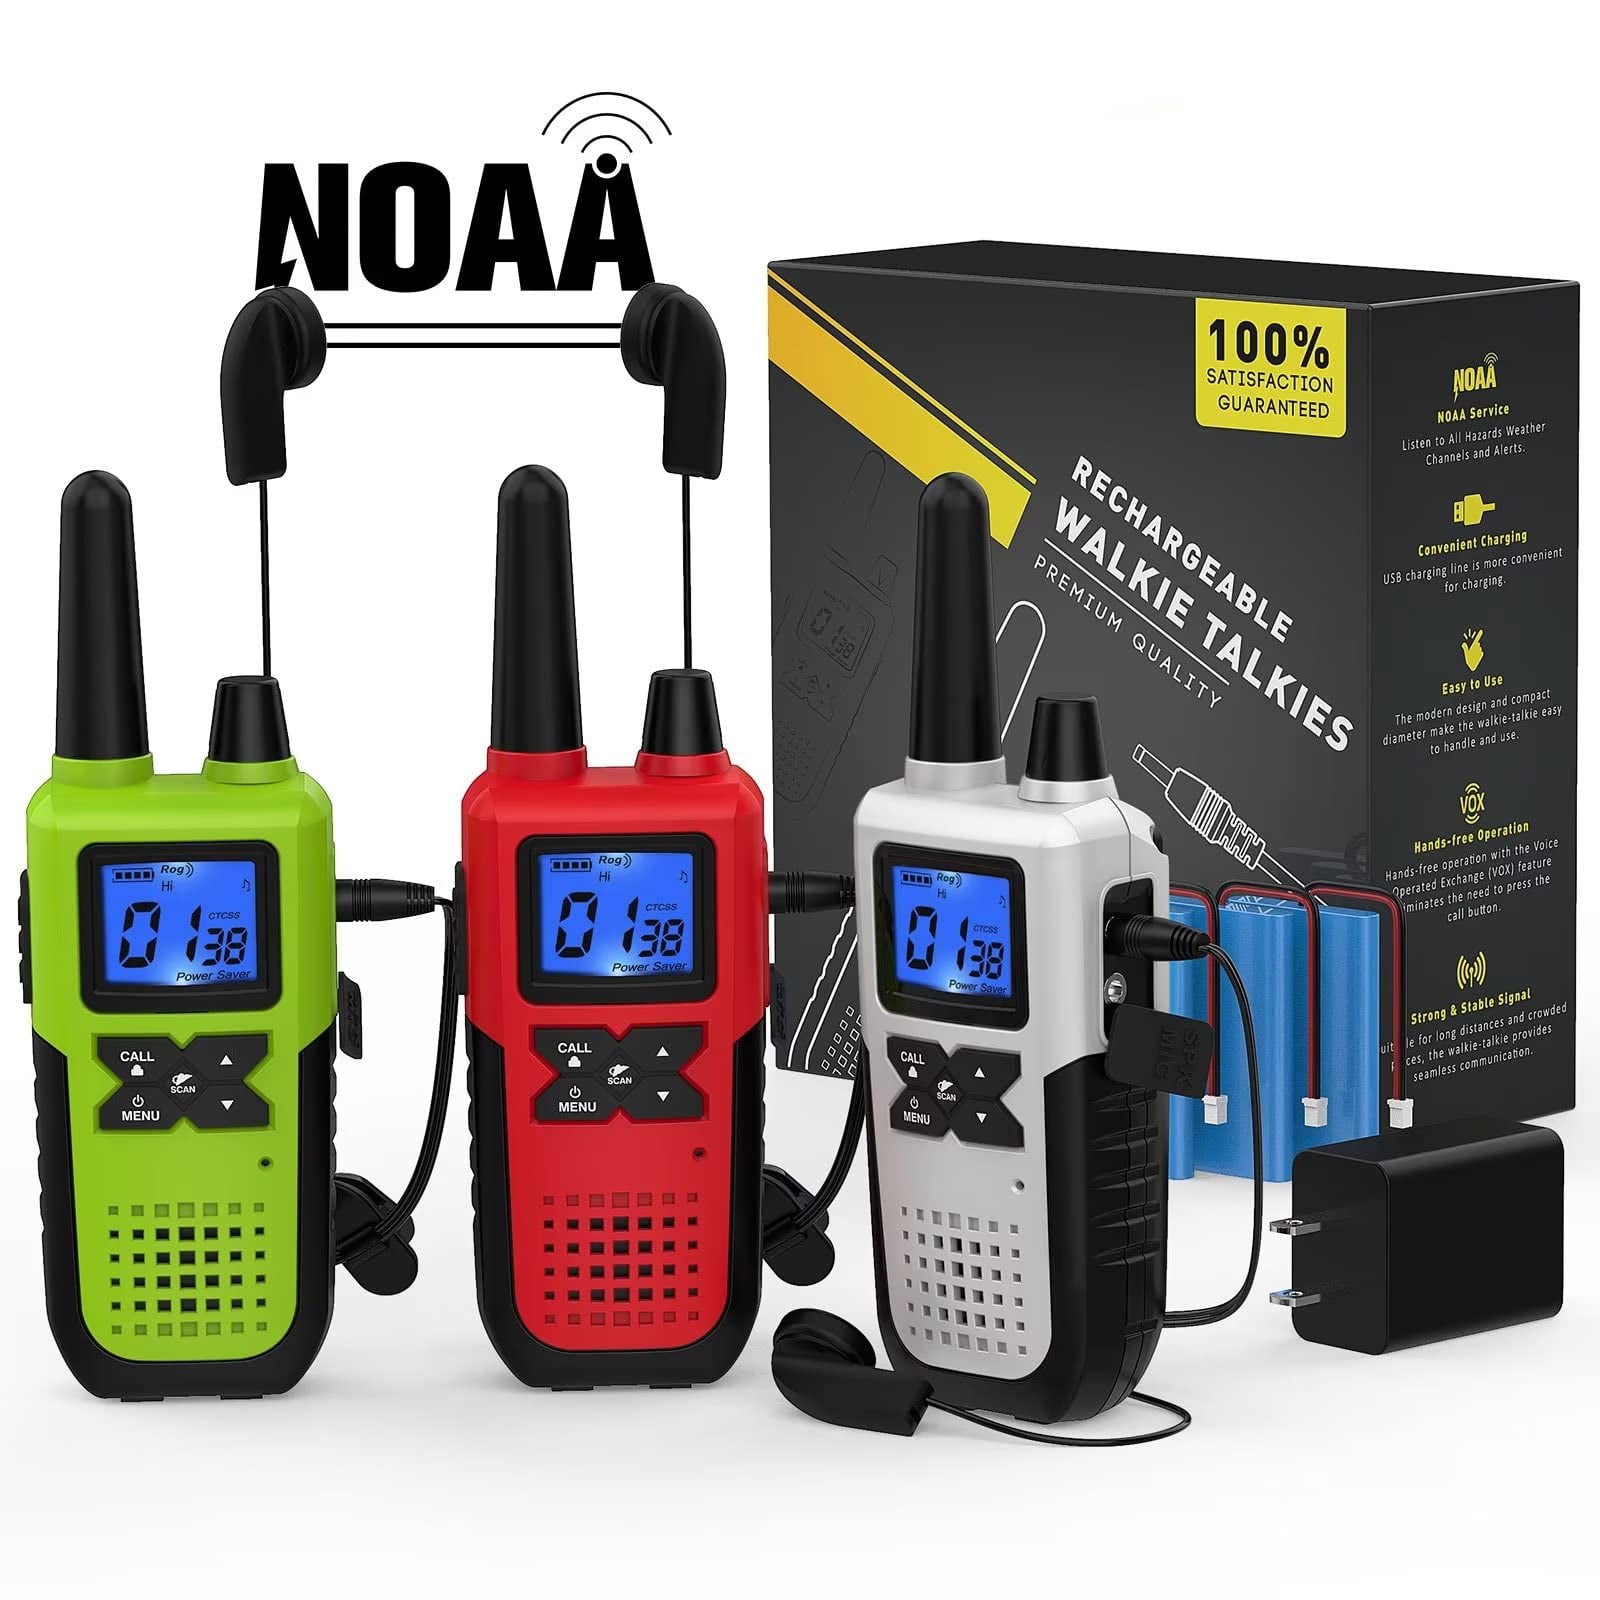 Rechargeable Walkie Talkies for Adults Long Range Long Distance Way  Radios Walkie Talkies Pack Work Walkie Talkies with Earpiece and Mic Set  Headsets USB Charger Battery NOAA Weather Radio